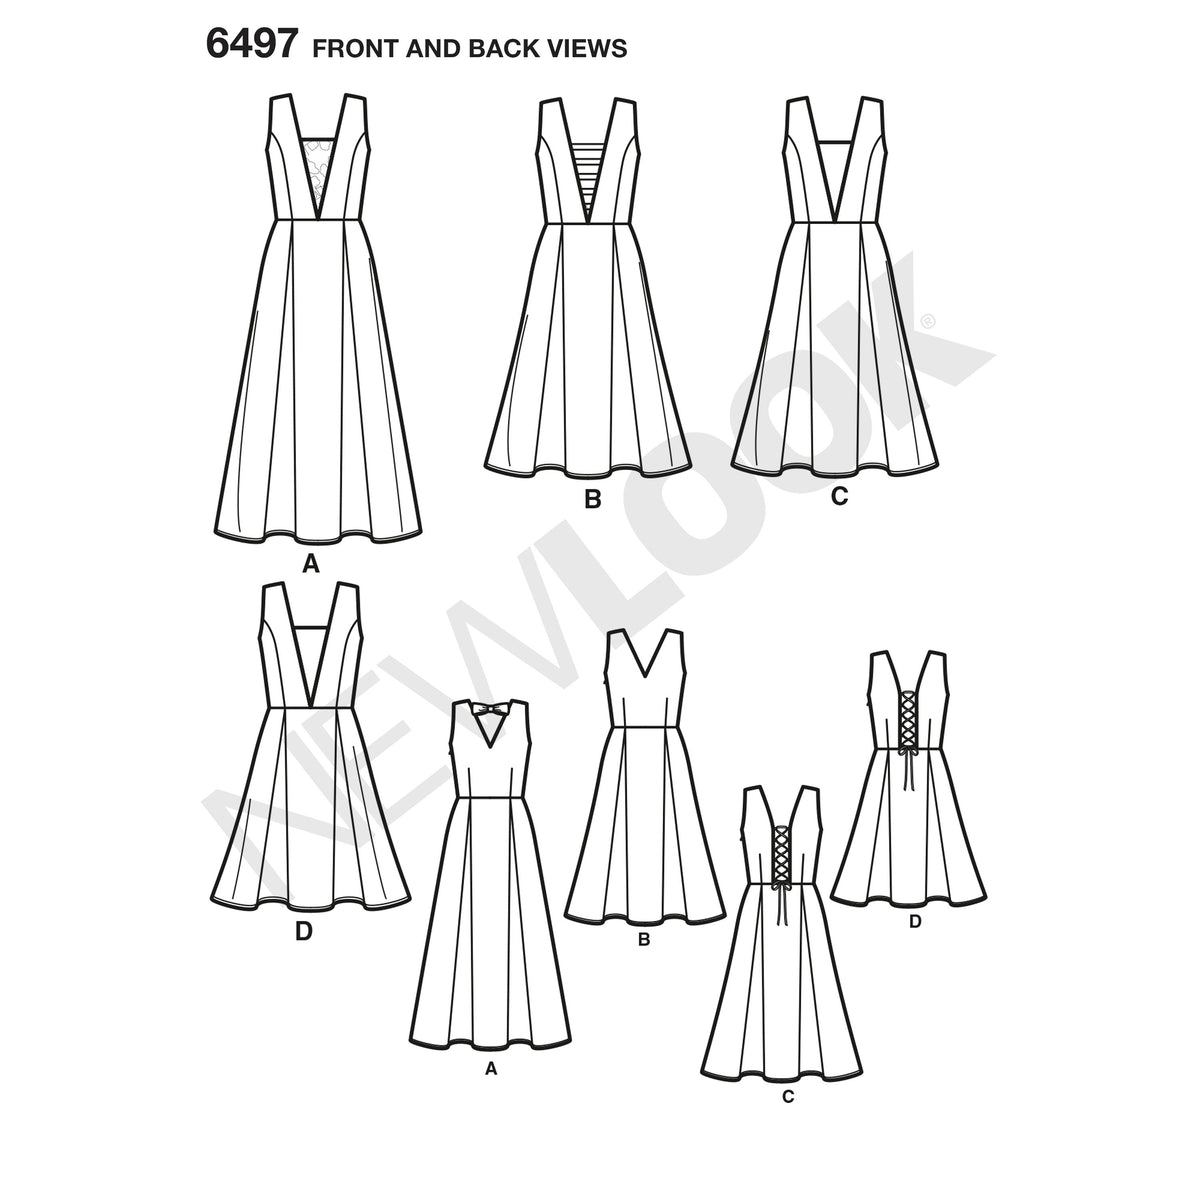 6497 New Look Pattern 6497 Misses Dress with Bodice and Length Variations